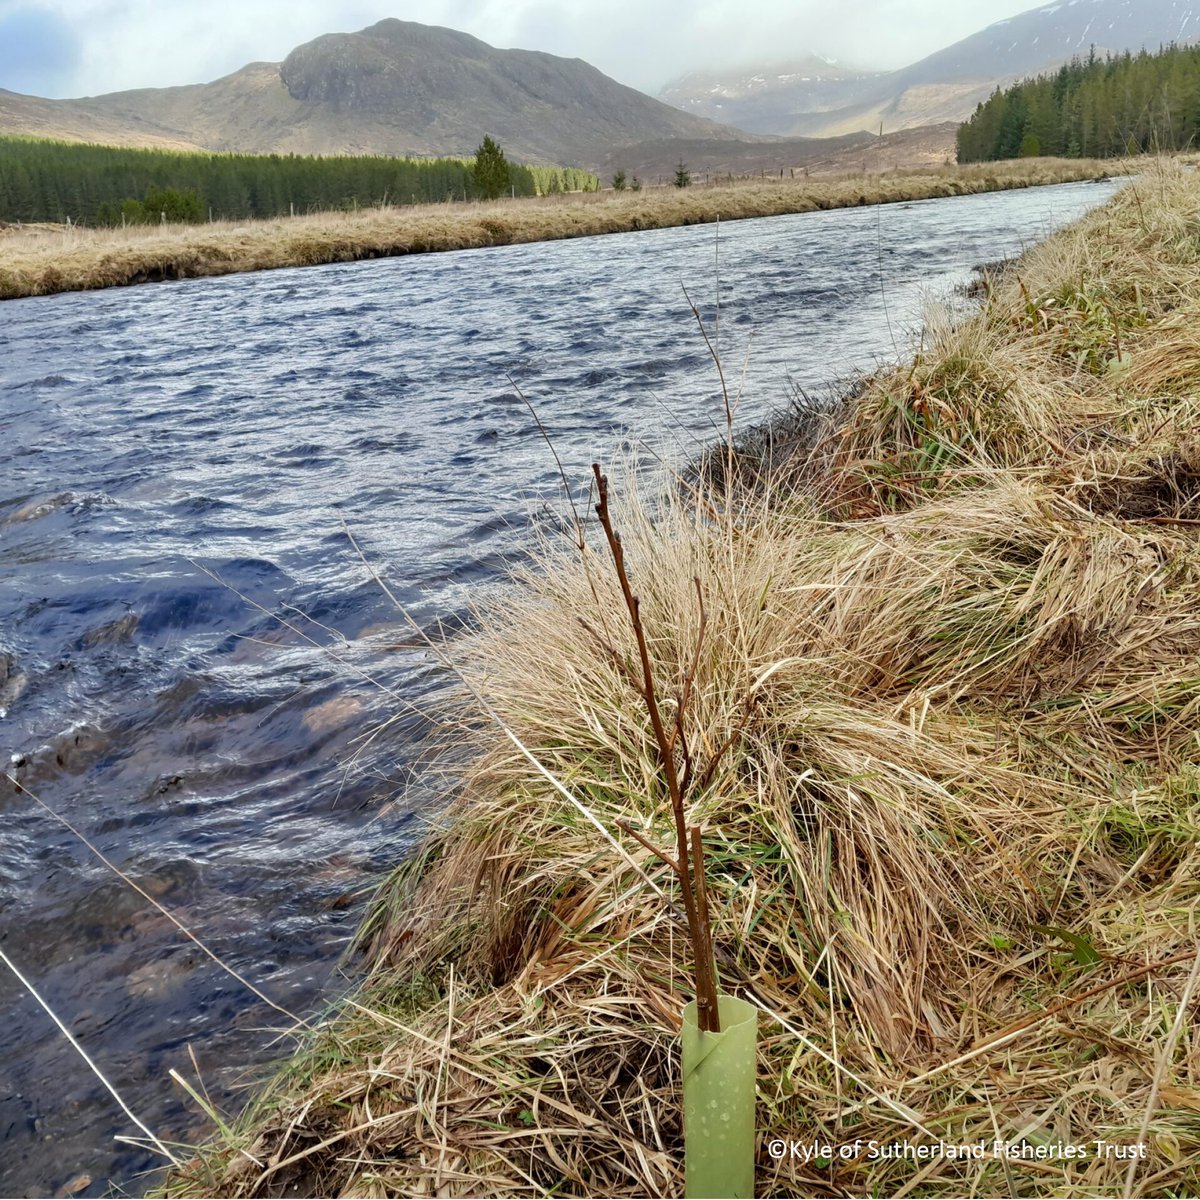 🌳The Riverwoods Blueprint project has completed three ‘shovel-ready’ river woodland planting projects. Each project exemplifies innovative river woodland restoration techniques. 🔗You can read more by following the link below. scottishwildlifetrust.org.uk/news/three-riv…